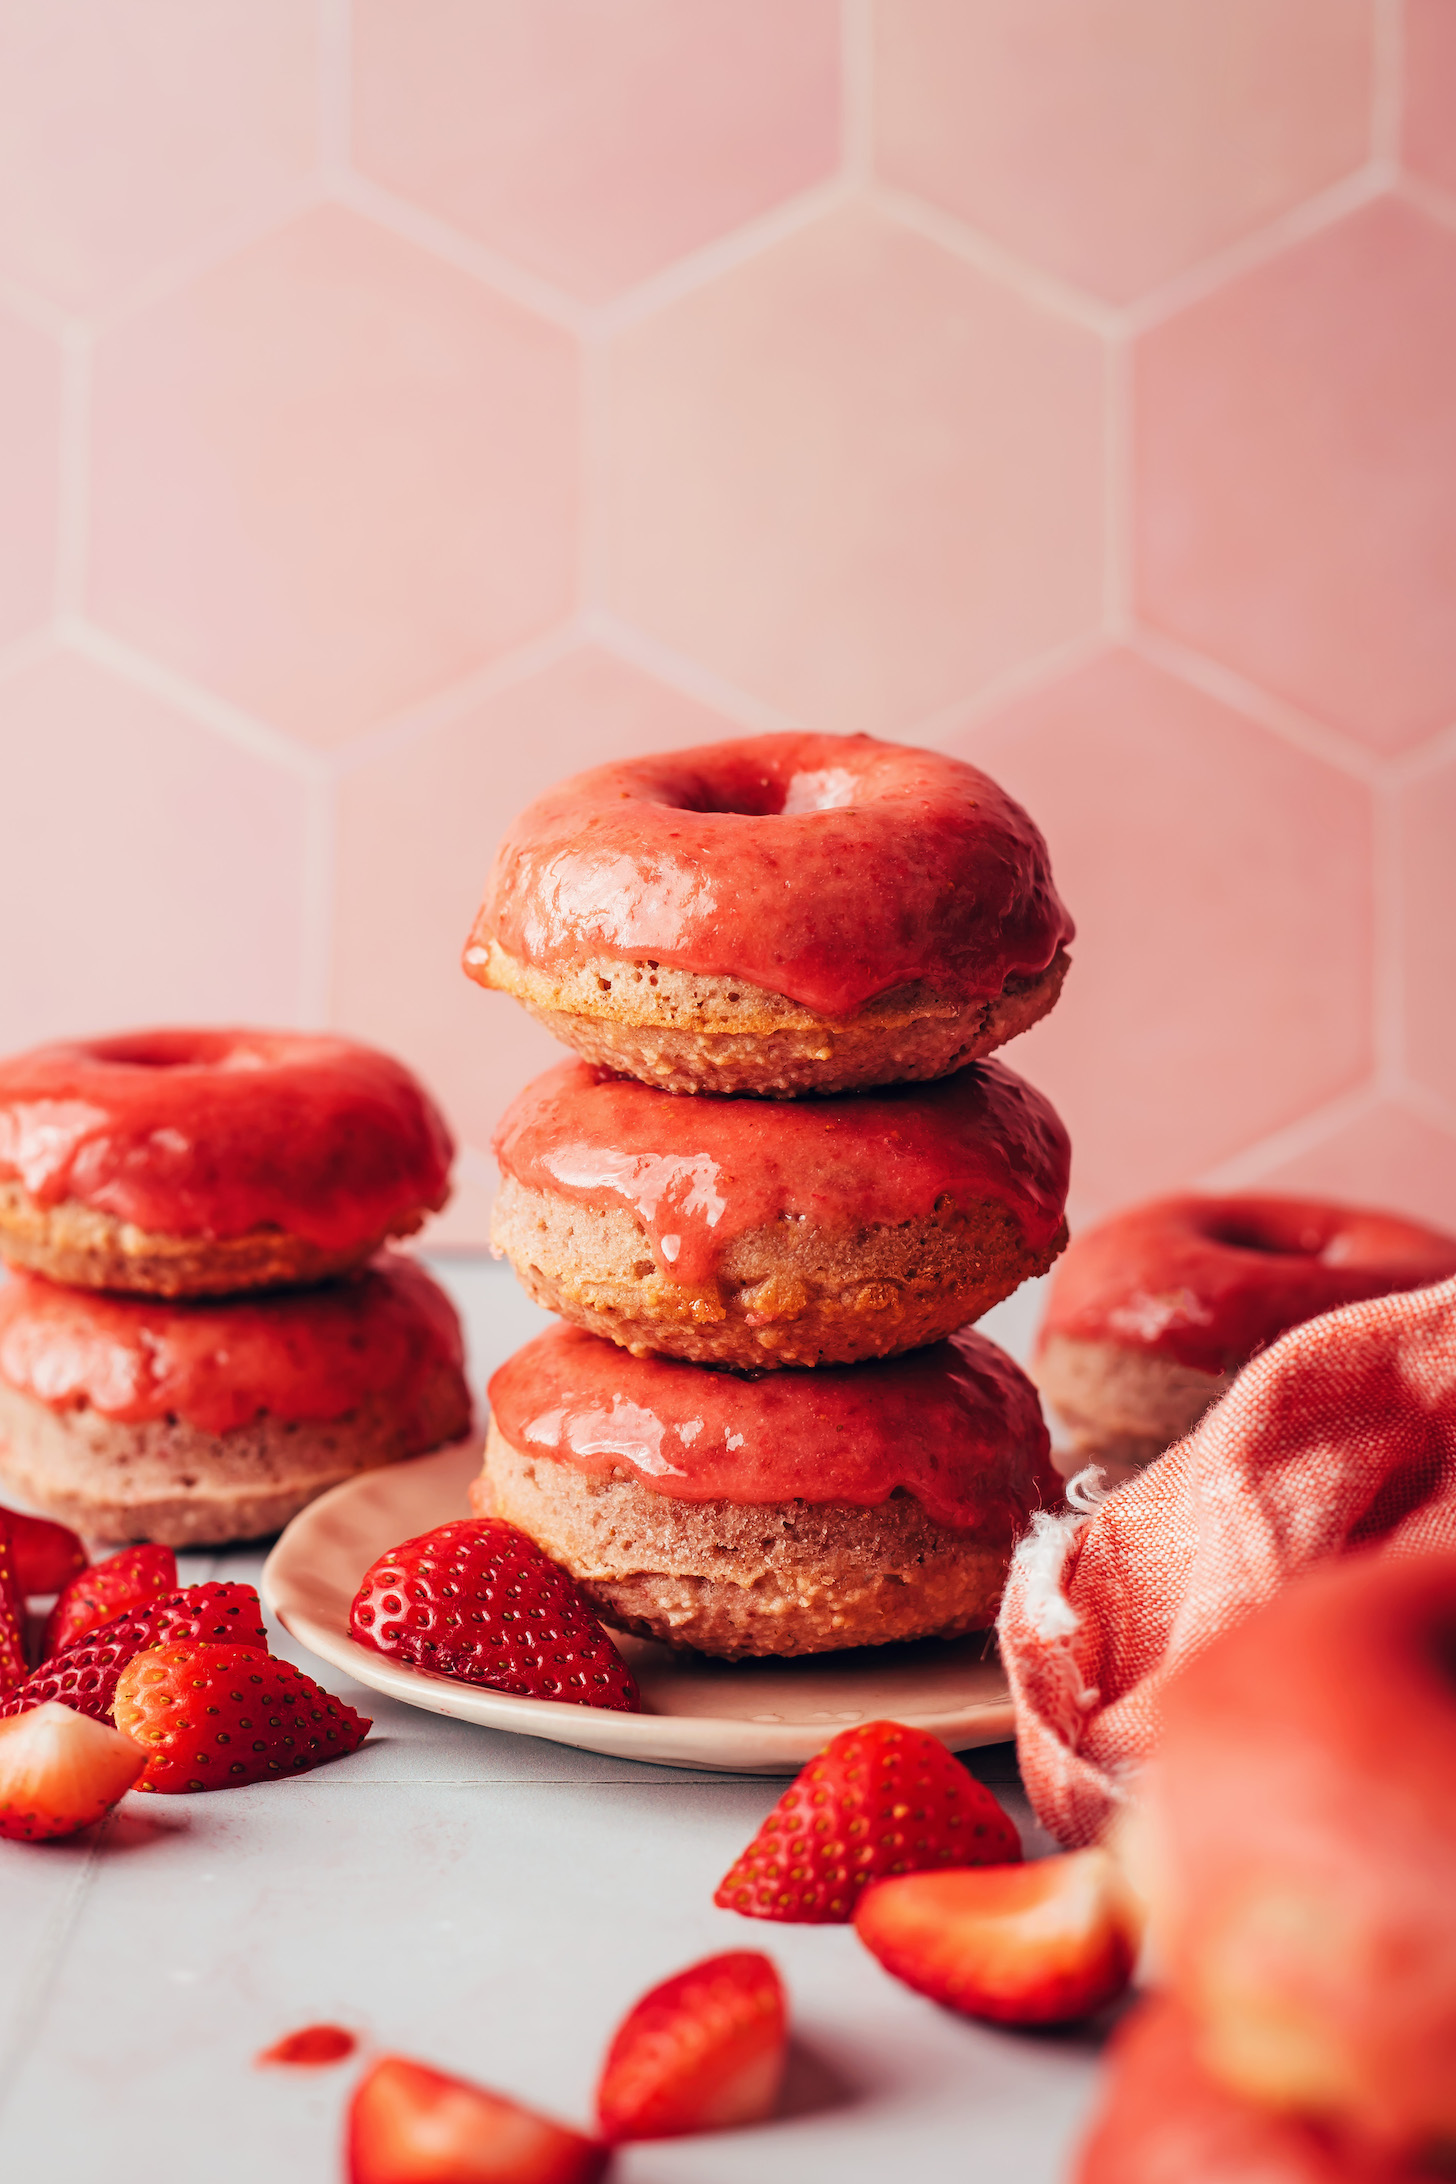 Stacks of vegan gluten-free strawberry donuts on a plate